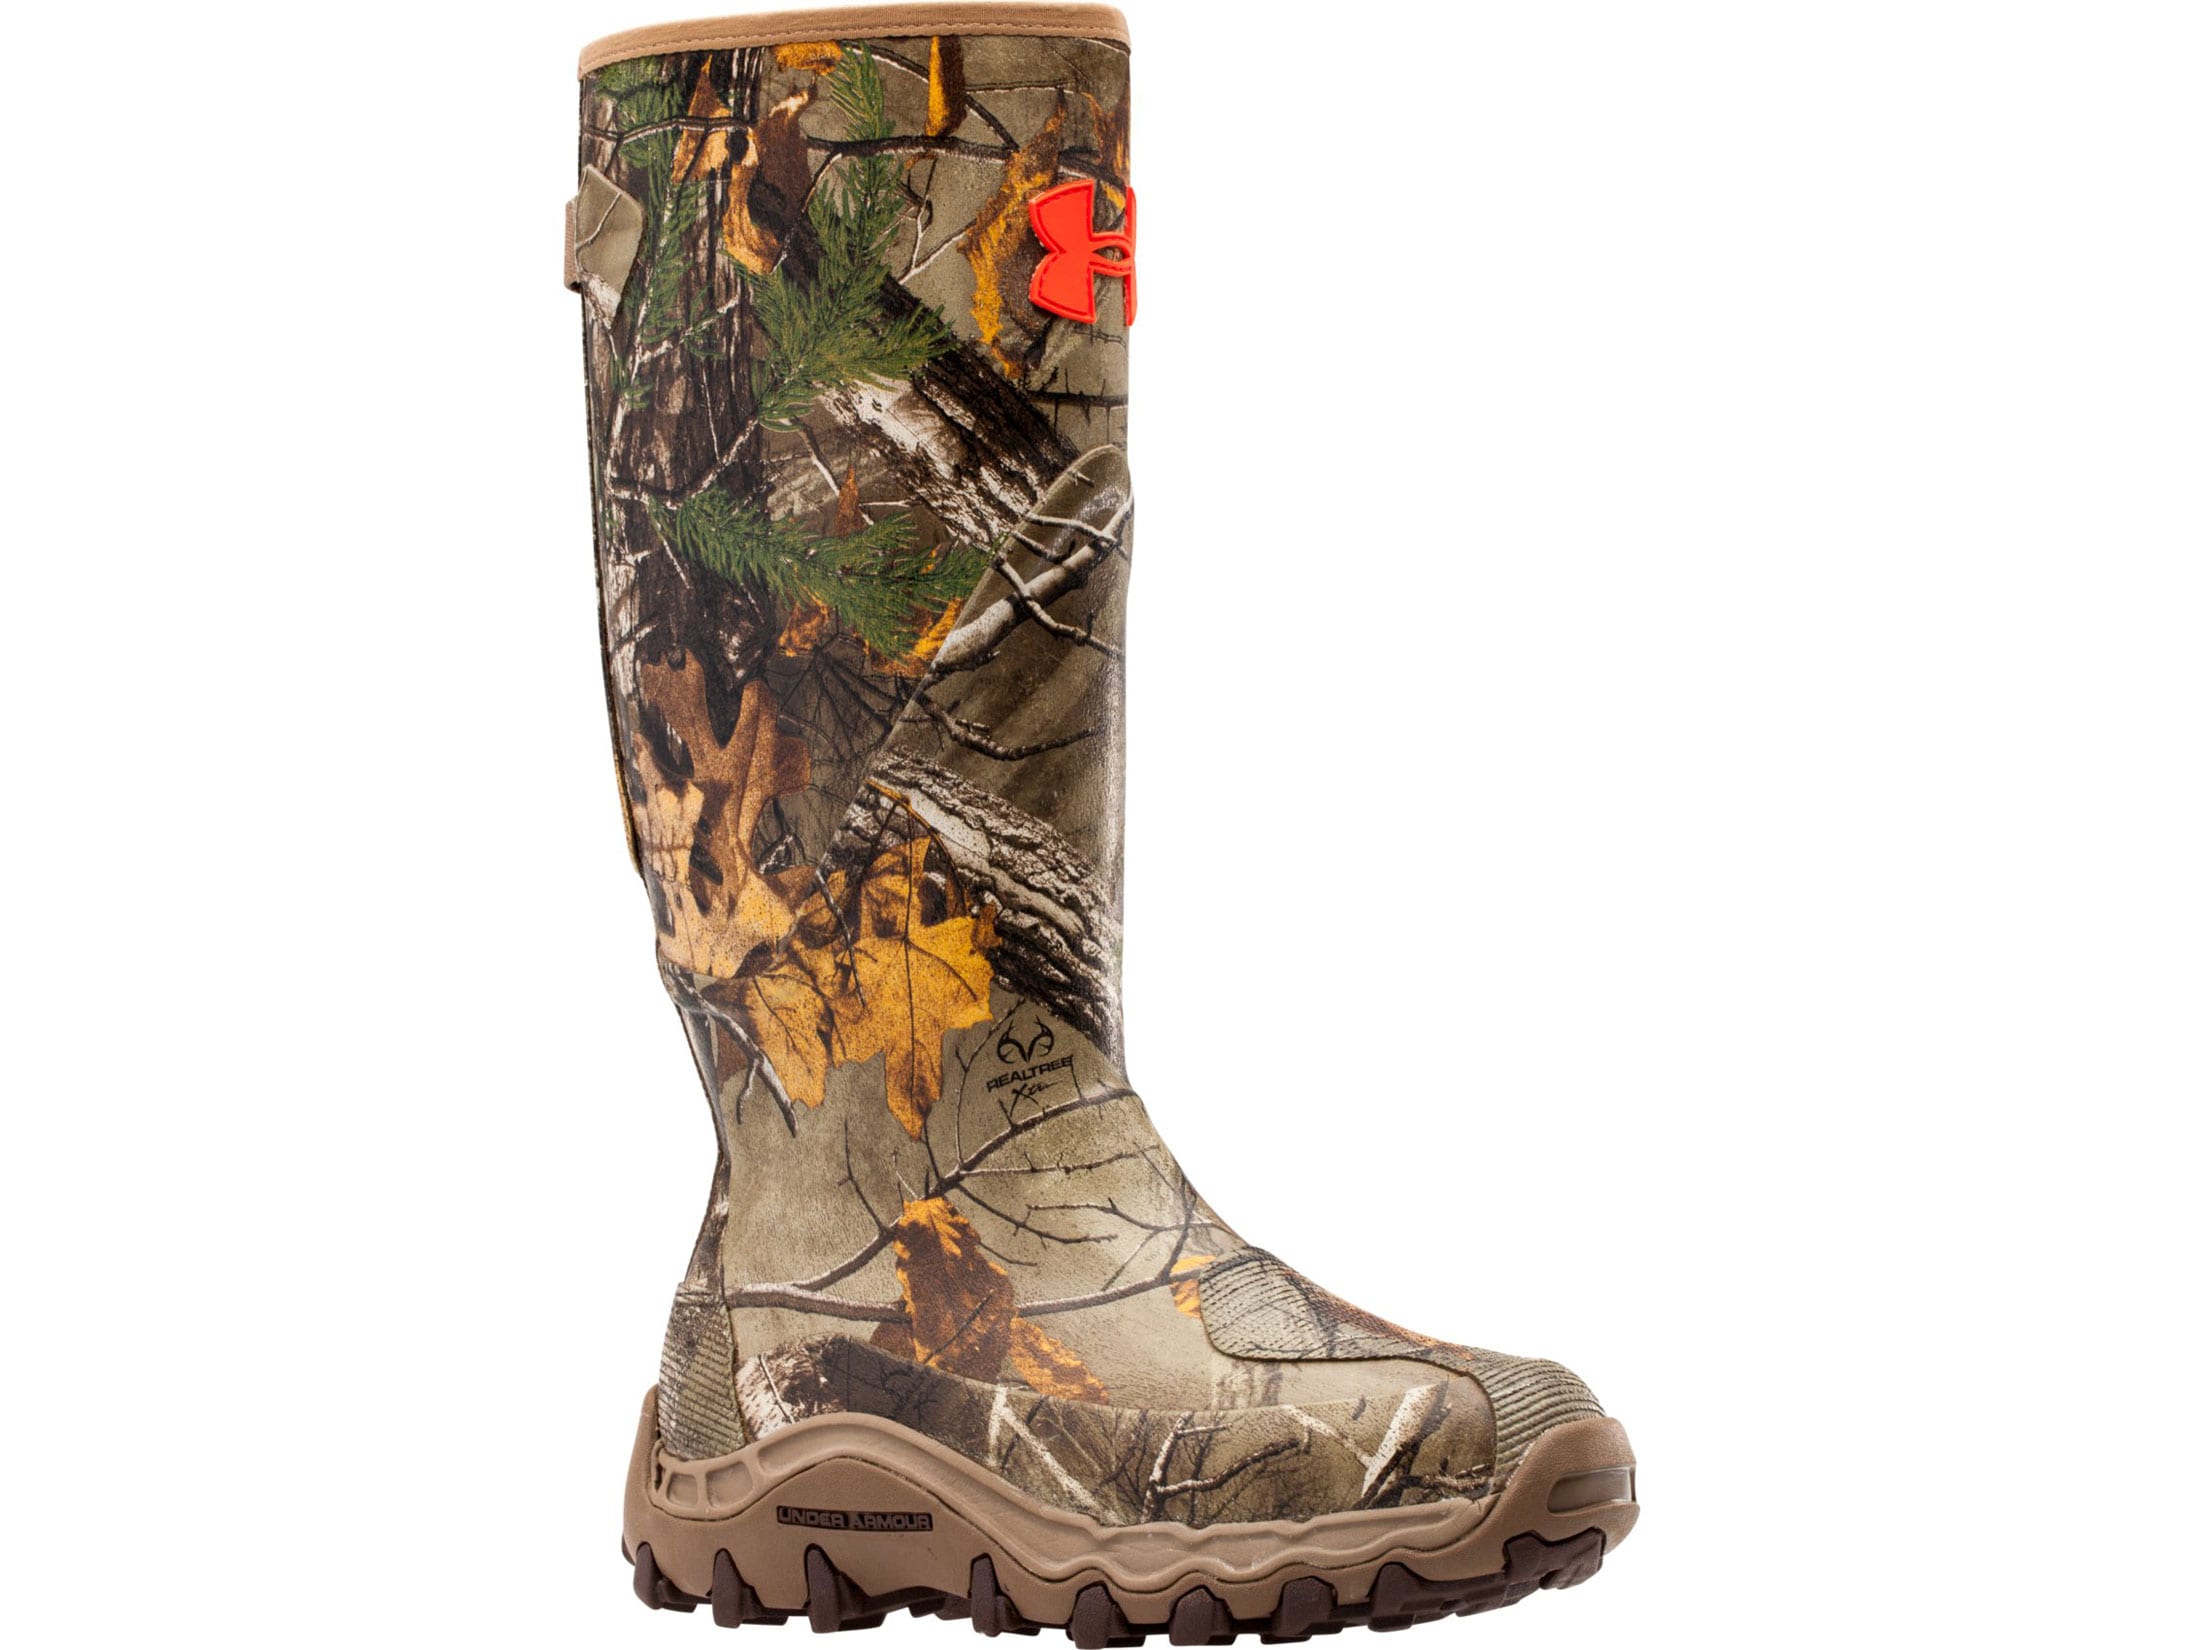 600 Gram Insulated Hunting Boots